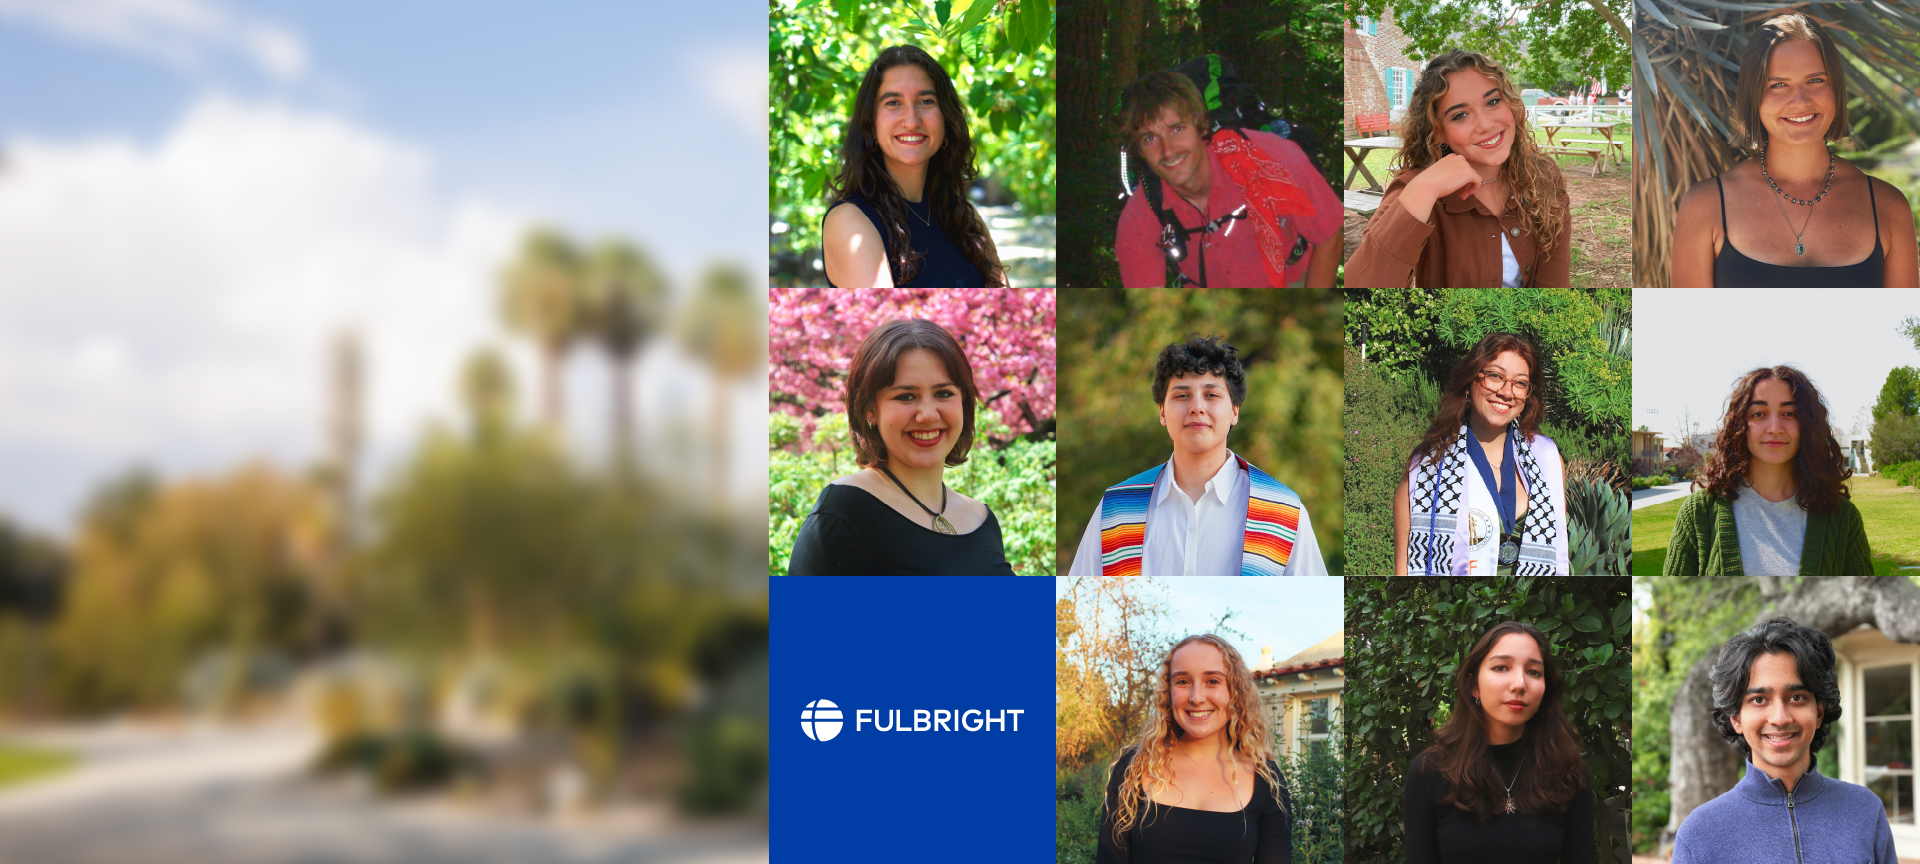 A collage of photos of student Fulbright winners